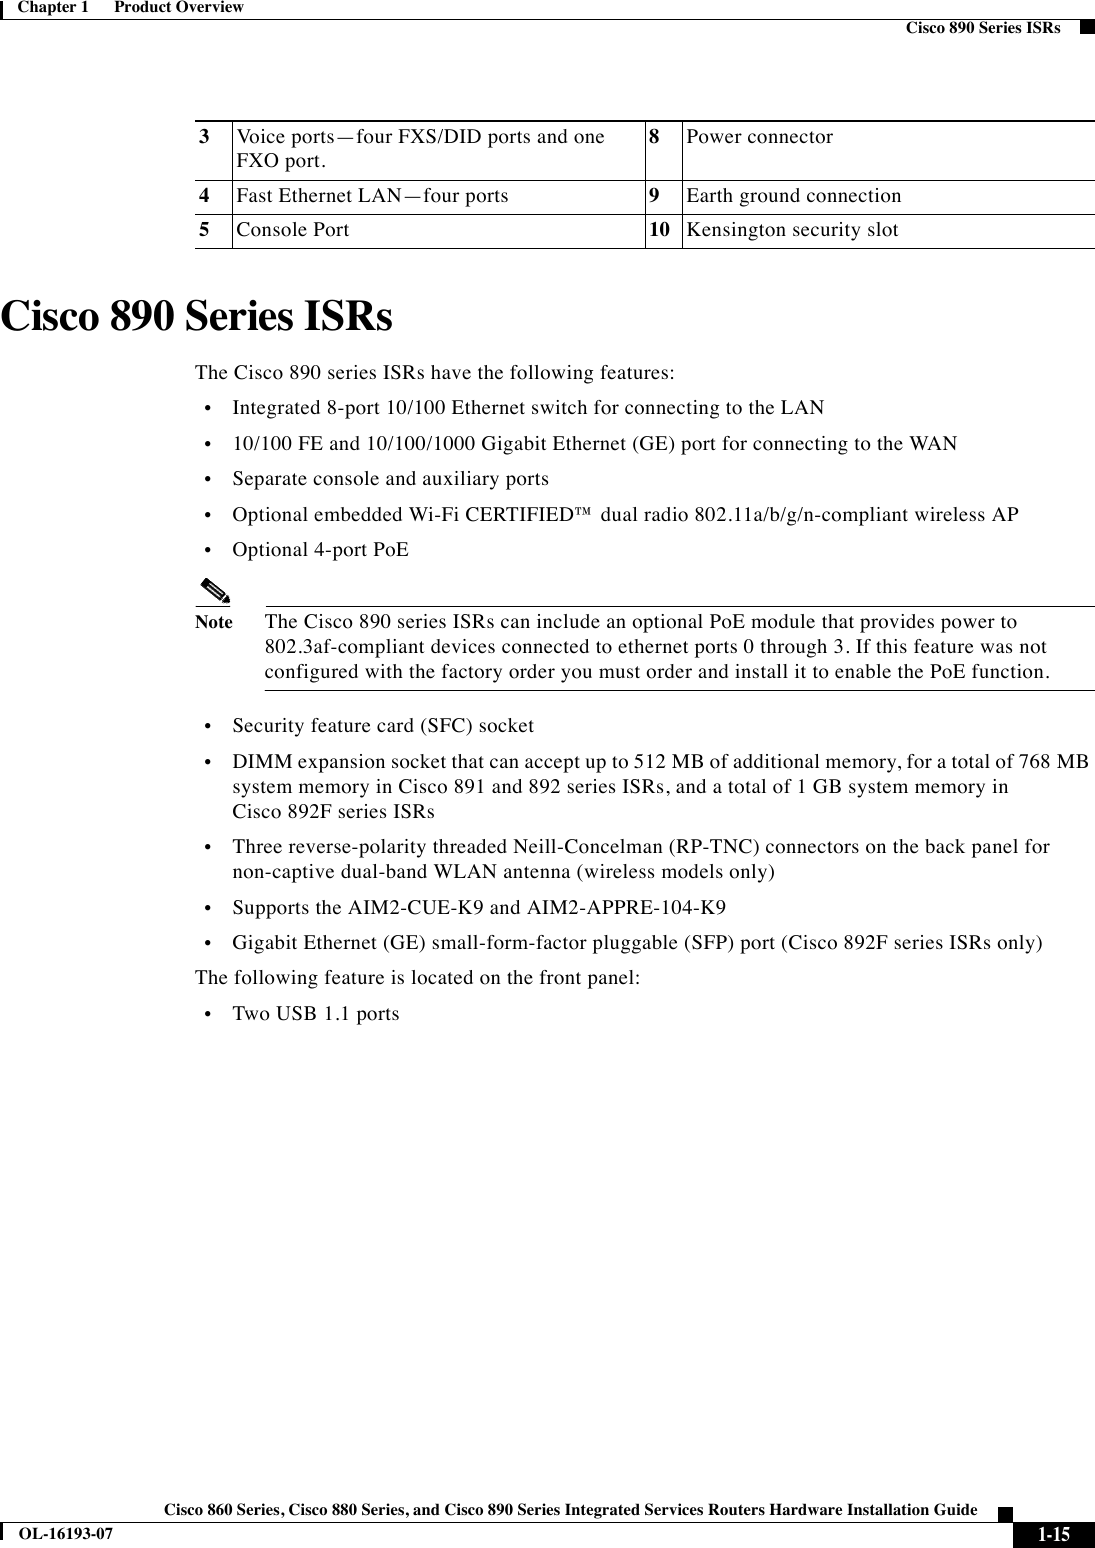  1-15Cisco 860 Series, Cisco 880 Series, and Cisco 890 Series Integrated Services Routers Hardware Installation GuideOL-16193-07Chapter 1      Product Overview  Cisco 890 Series ISRsCisco 890 Series ISRsThe Cisco 890 series ISRs have the following features:  •Integrated 8-port 10/100 Ethernet switch for connecting to the LAN   •10/100 FE and 10/100/1000 Gigabit Ethernet (GE) port for connecting to the WAN  •Separate console and auxiliary ports  •Optional embedded Wi-Fi CERTIFIED™ dual radio 802.11a/b/g/n-compliant wireless AP  •Optional 4-port PoENoteThe Cisco 890 series ISRs can include an optional PoE module that provides power to 802.3af-compliant devices connected to ethernet ports 0 through 3. If this feature was not configured with the factory order you must order and install it to enable the PoE function.  •Security feature card (SFC) socket  •DIMM expansion socket that can accept up to 512 MB of additional memory, for a total of 768 MB system memory in Cisco 891 and 892 series ISRs, and a total of 1 GB system memory in Cisco 892F series ISRs  •Three reverse-polarity threaded Neill-Concelman (RP-TNC) connectors on the back panel for non-captive dual-band WLAN antenna (wireless models only)  •Supports the AIM2-CUE-K9 and AIM2-APPRE-104-K9   •Gigabit Ethernet (GE) small-form-factor pluggable (SFP) port (Cisco 892F series ISRs only)The following feature is located on the front panel:  •Two USB 1.1 ports3Voice ports—four FXS/DID ports and one FXO port.8Power connector4Fast Ethernet LAN—four ports 9Earth ground connection5Console Port 10 Kensington security slot